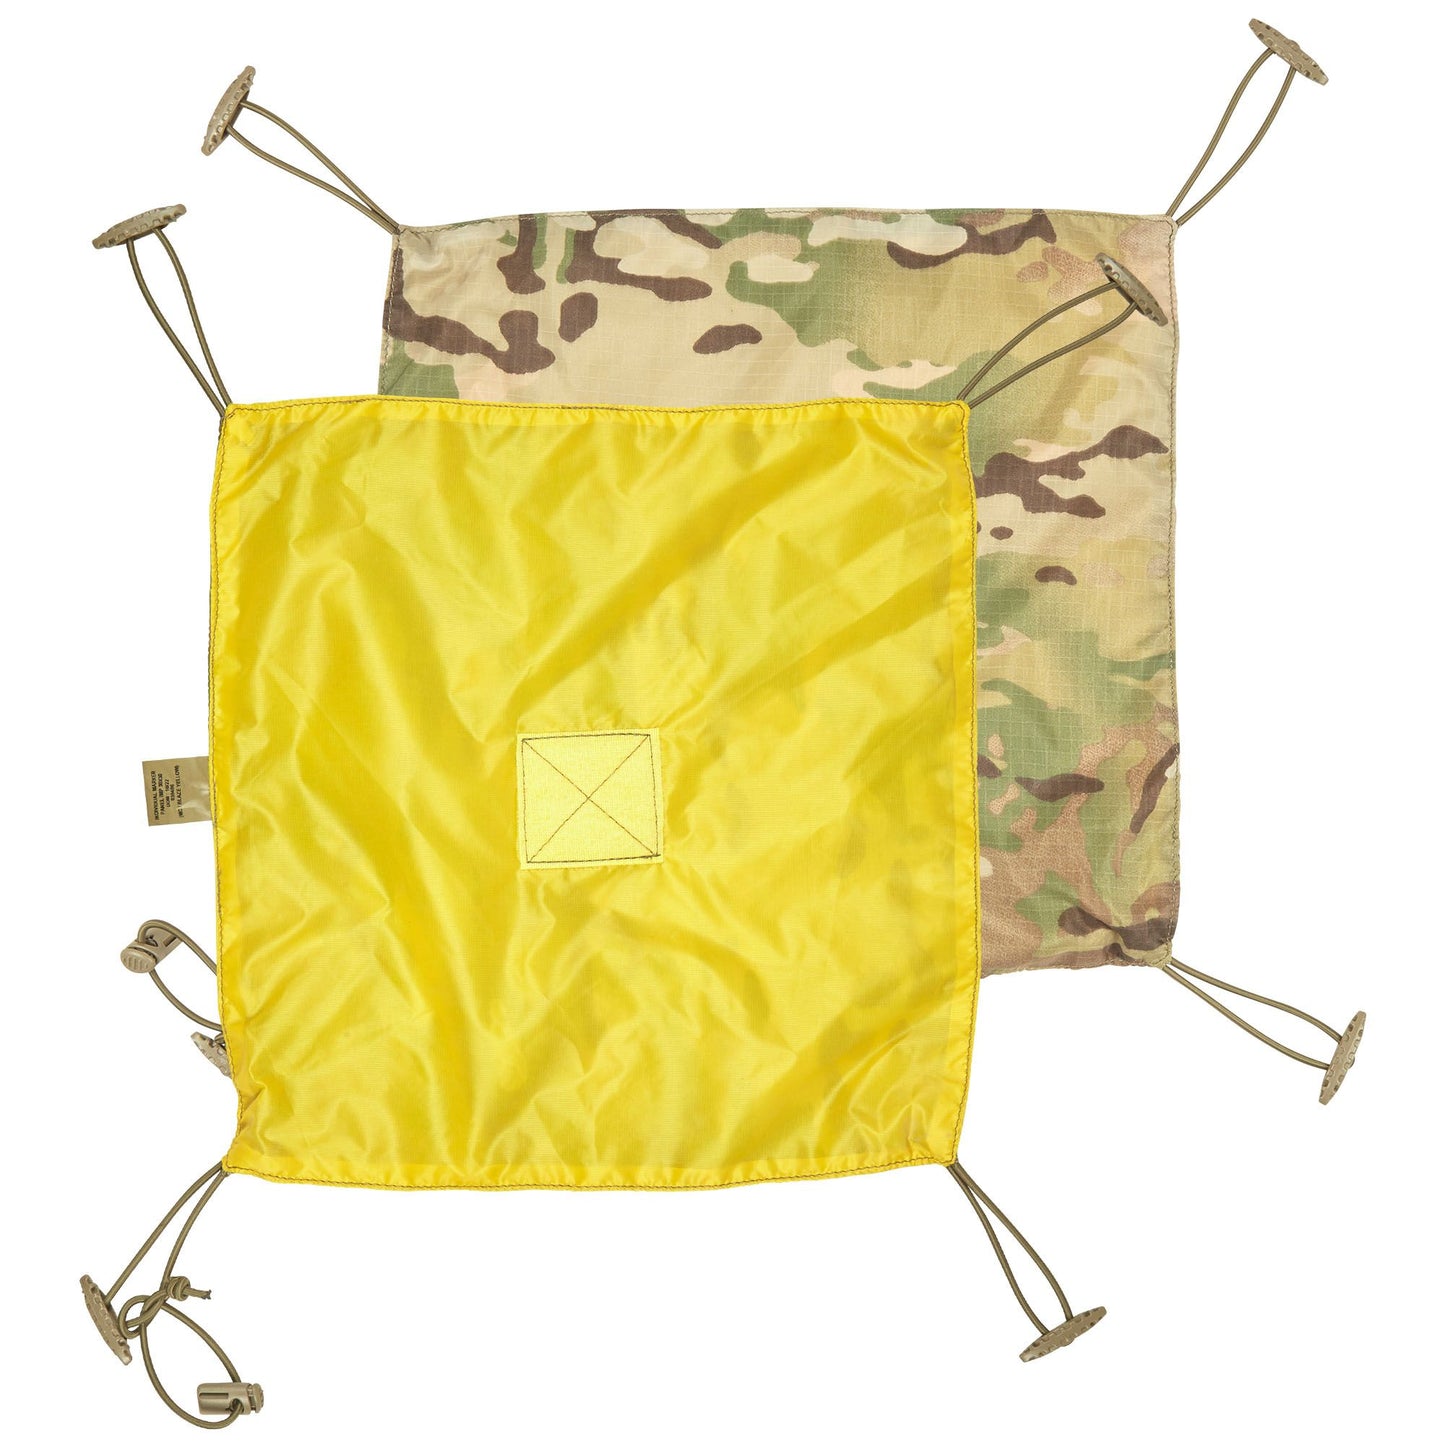 The Platatac individual marker panel is a lightweight high visibility item, that is perfect to carry in your kit for individual recognition when conducting marry up, RV, signaling vehicles or aircraft. www.defenceqstore.com.au